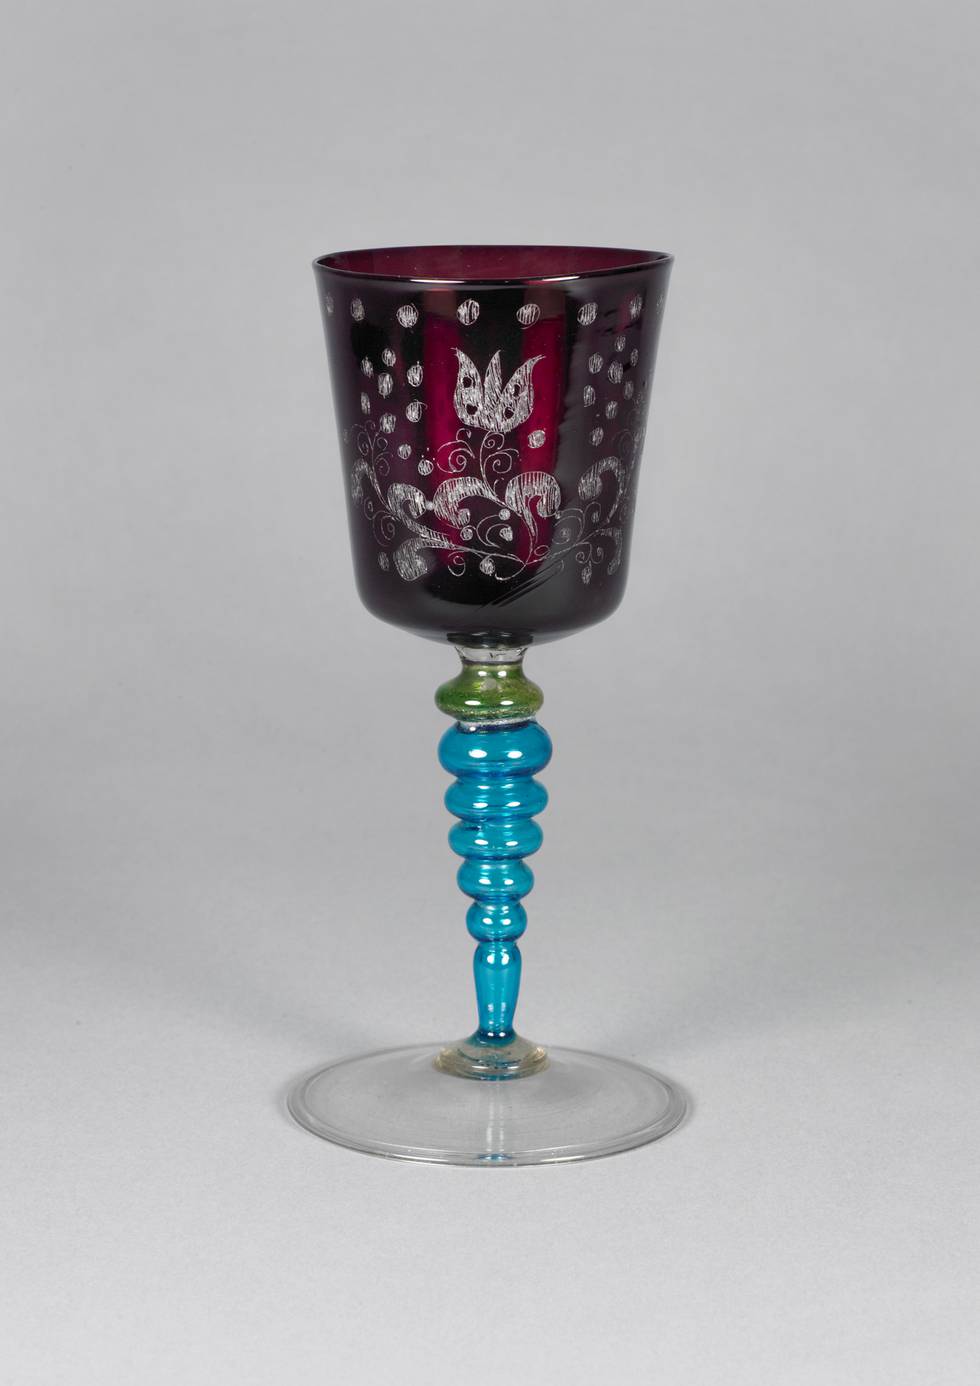 Venetian glass vessel with a blue stem and a red cup